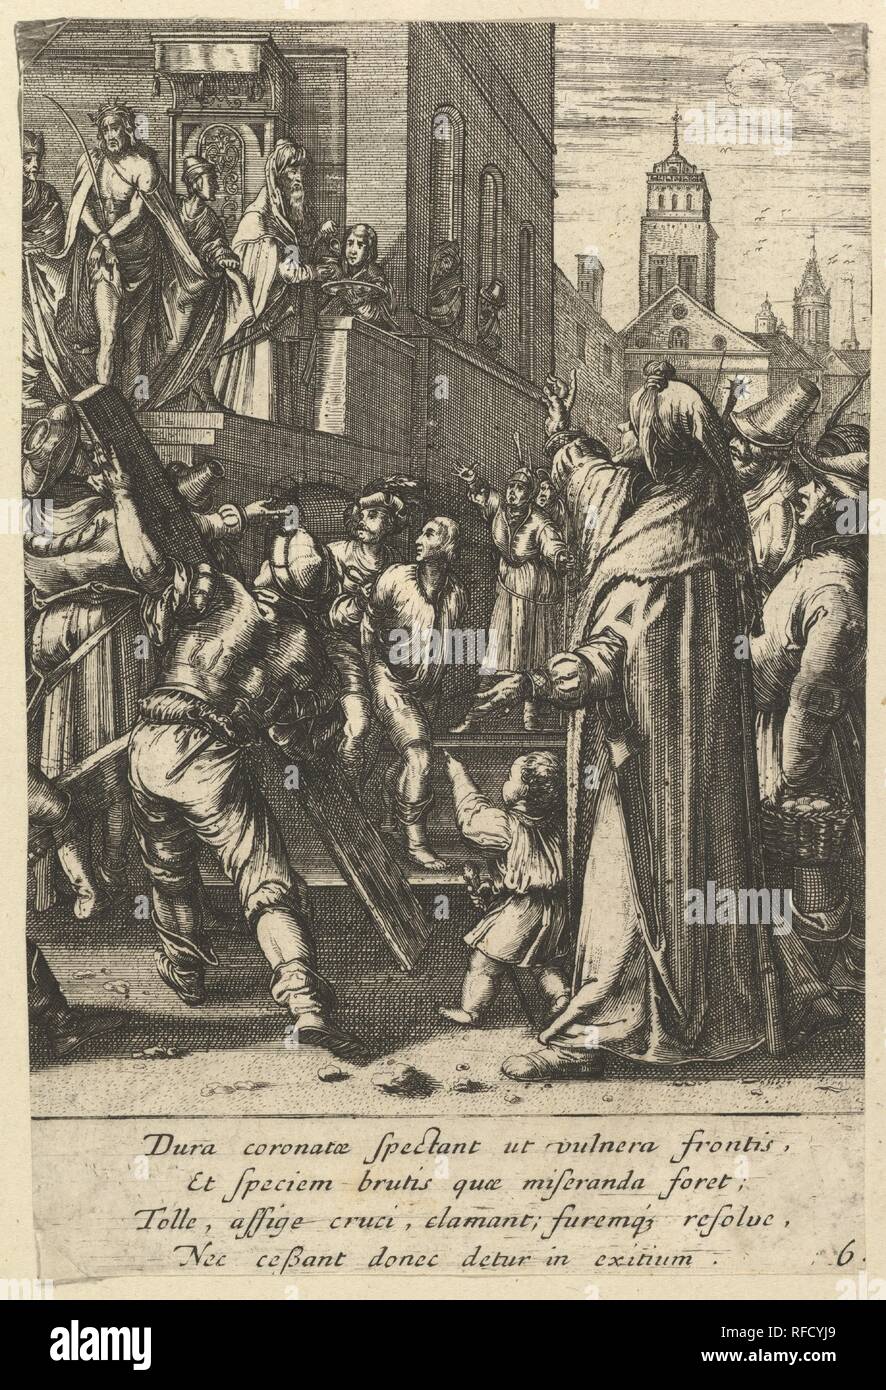 Ecce Homo, from The Passion of Christ. Artist: After Hendrick Goltzius (Netherlandish, Mühlbracht 1558-1617 Haarlem); Nicolas Cochin (French, Troyes 1610-1686 Paris). Dimensions: Sheet: 5 13/16 x 3 7/8 in. (14.8 x 9.9 cm). Publisher: Jean I Leblond (French, ca. 1590-1666 Paris). Date: mid 17th century. Museum: Metropolitan Museum of Art, New York, USA. Stock Photo